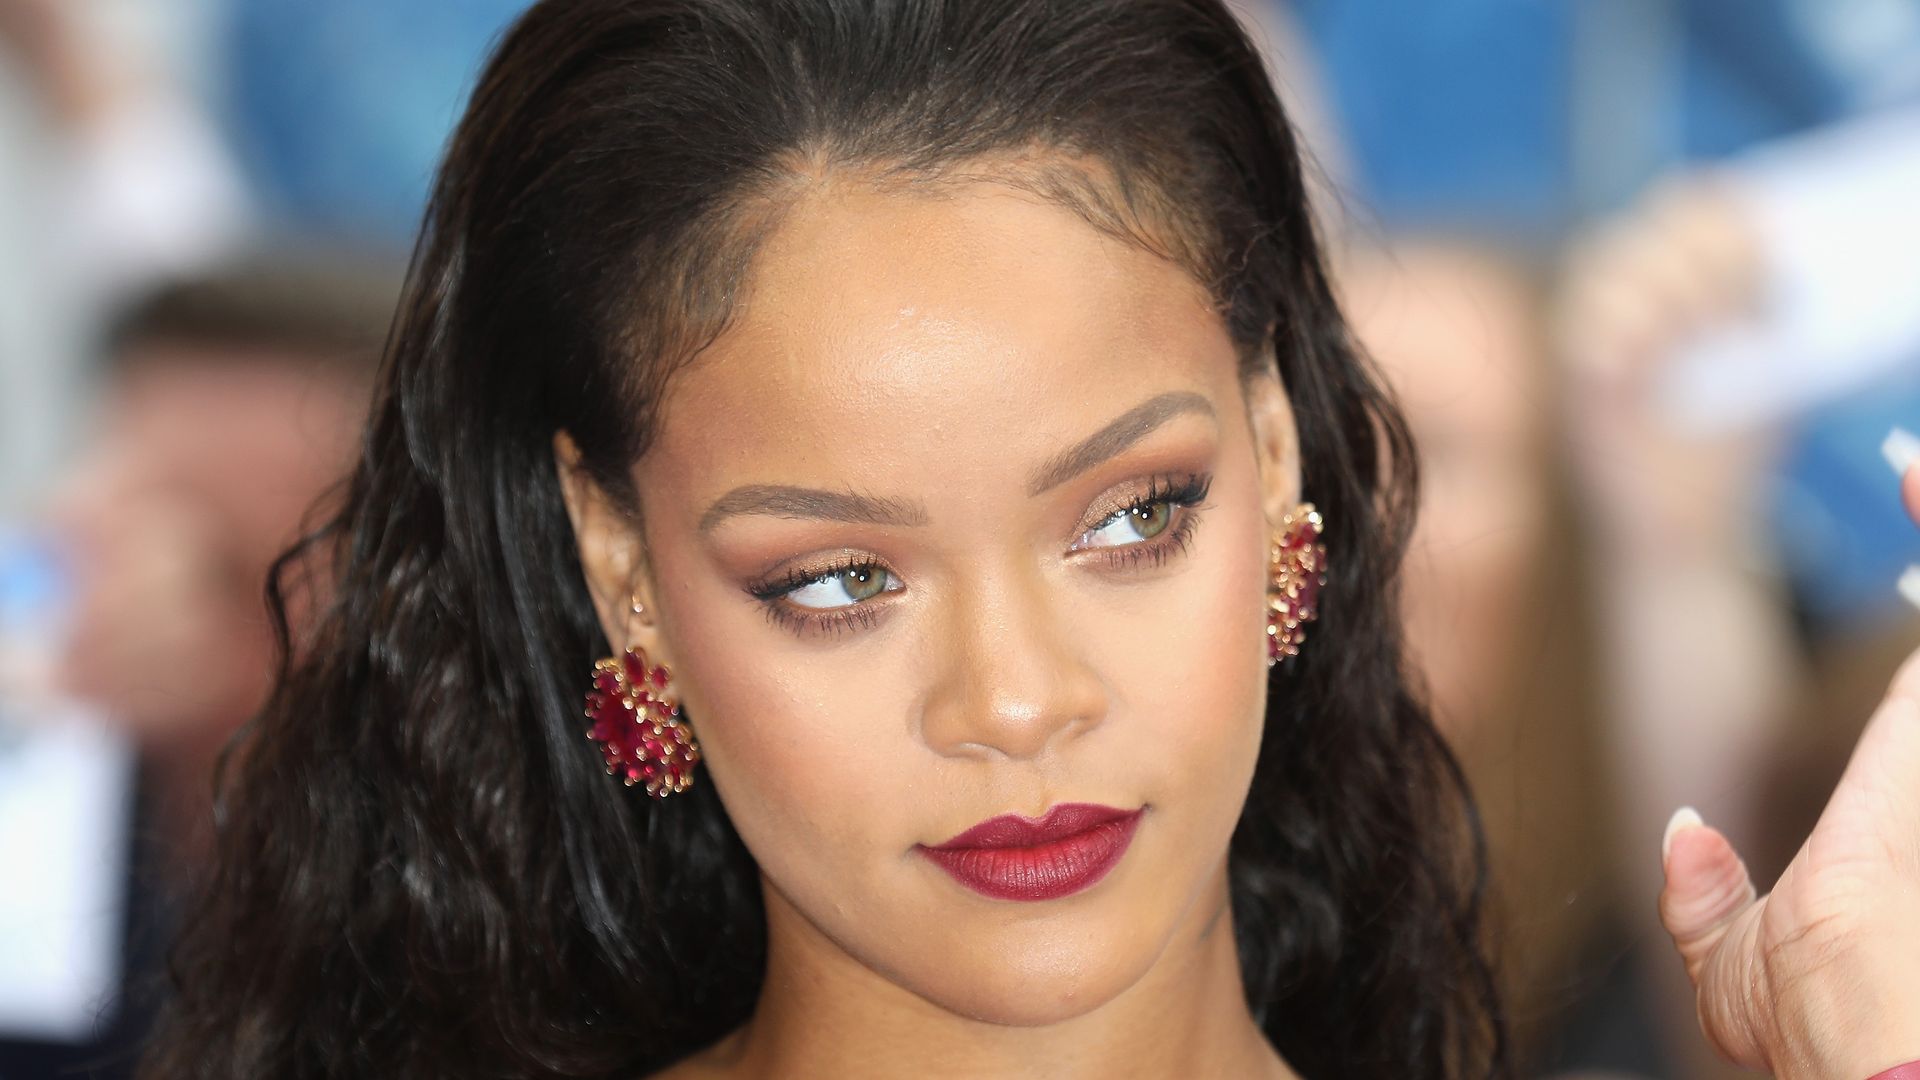 Rihanna causes a stir as she poses in red hot lace lingerie